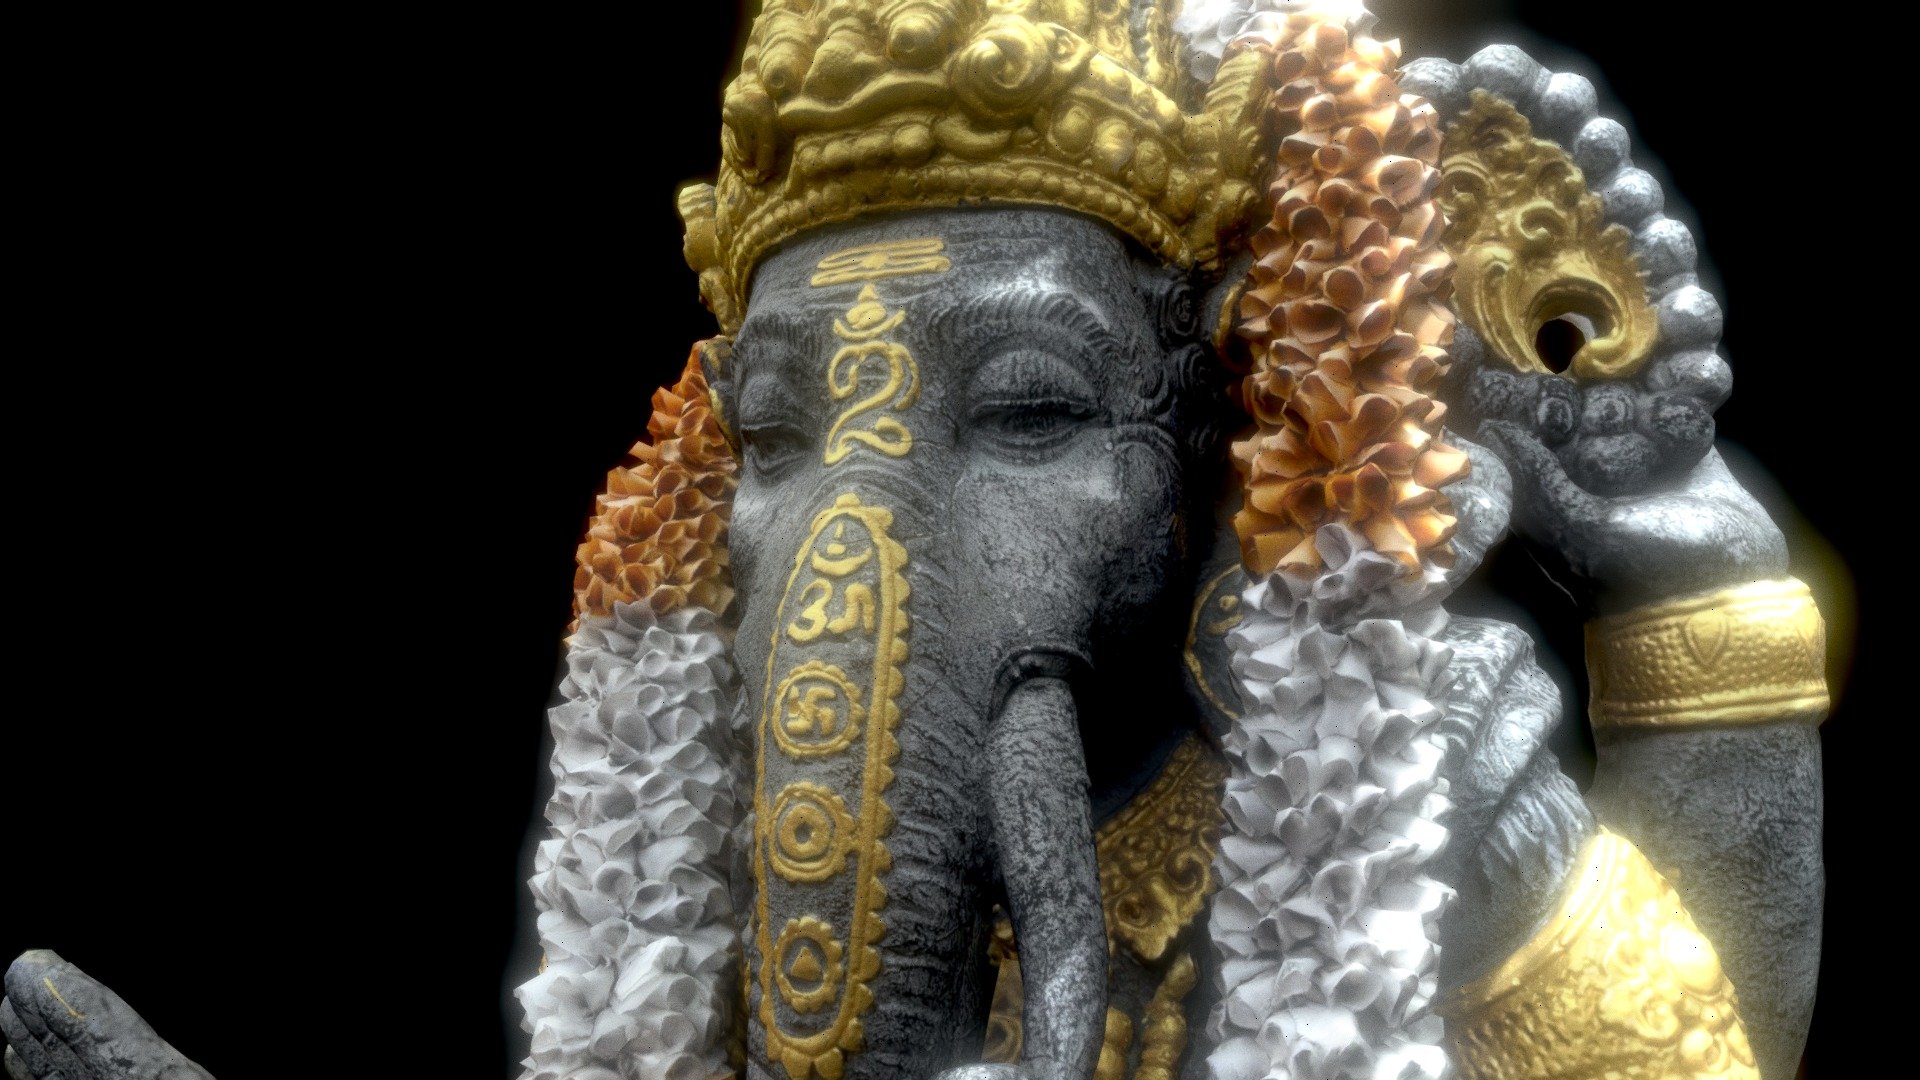 High resolution photo-realistic Ganesha statue from Bali, Indonesia. Scan with texture The Model shown has a 8K textureset (Basecolor/Albedo, Occl, Roughness and Normal map).

Created in blender with love! - Ganesha Statue Bali v2 photogrammetry - 3D model by Roman Rö (@romanro) 3d model